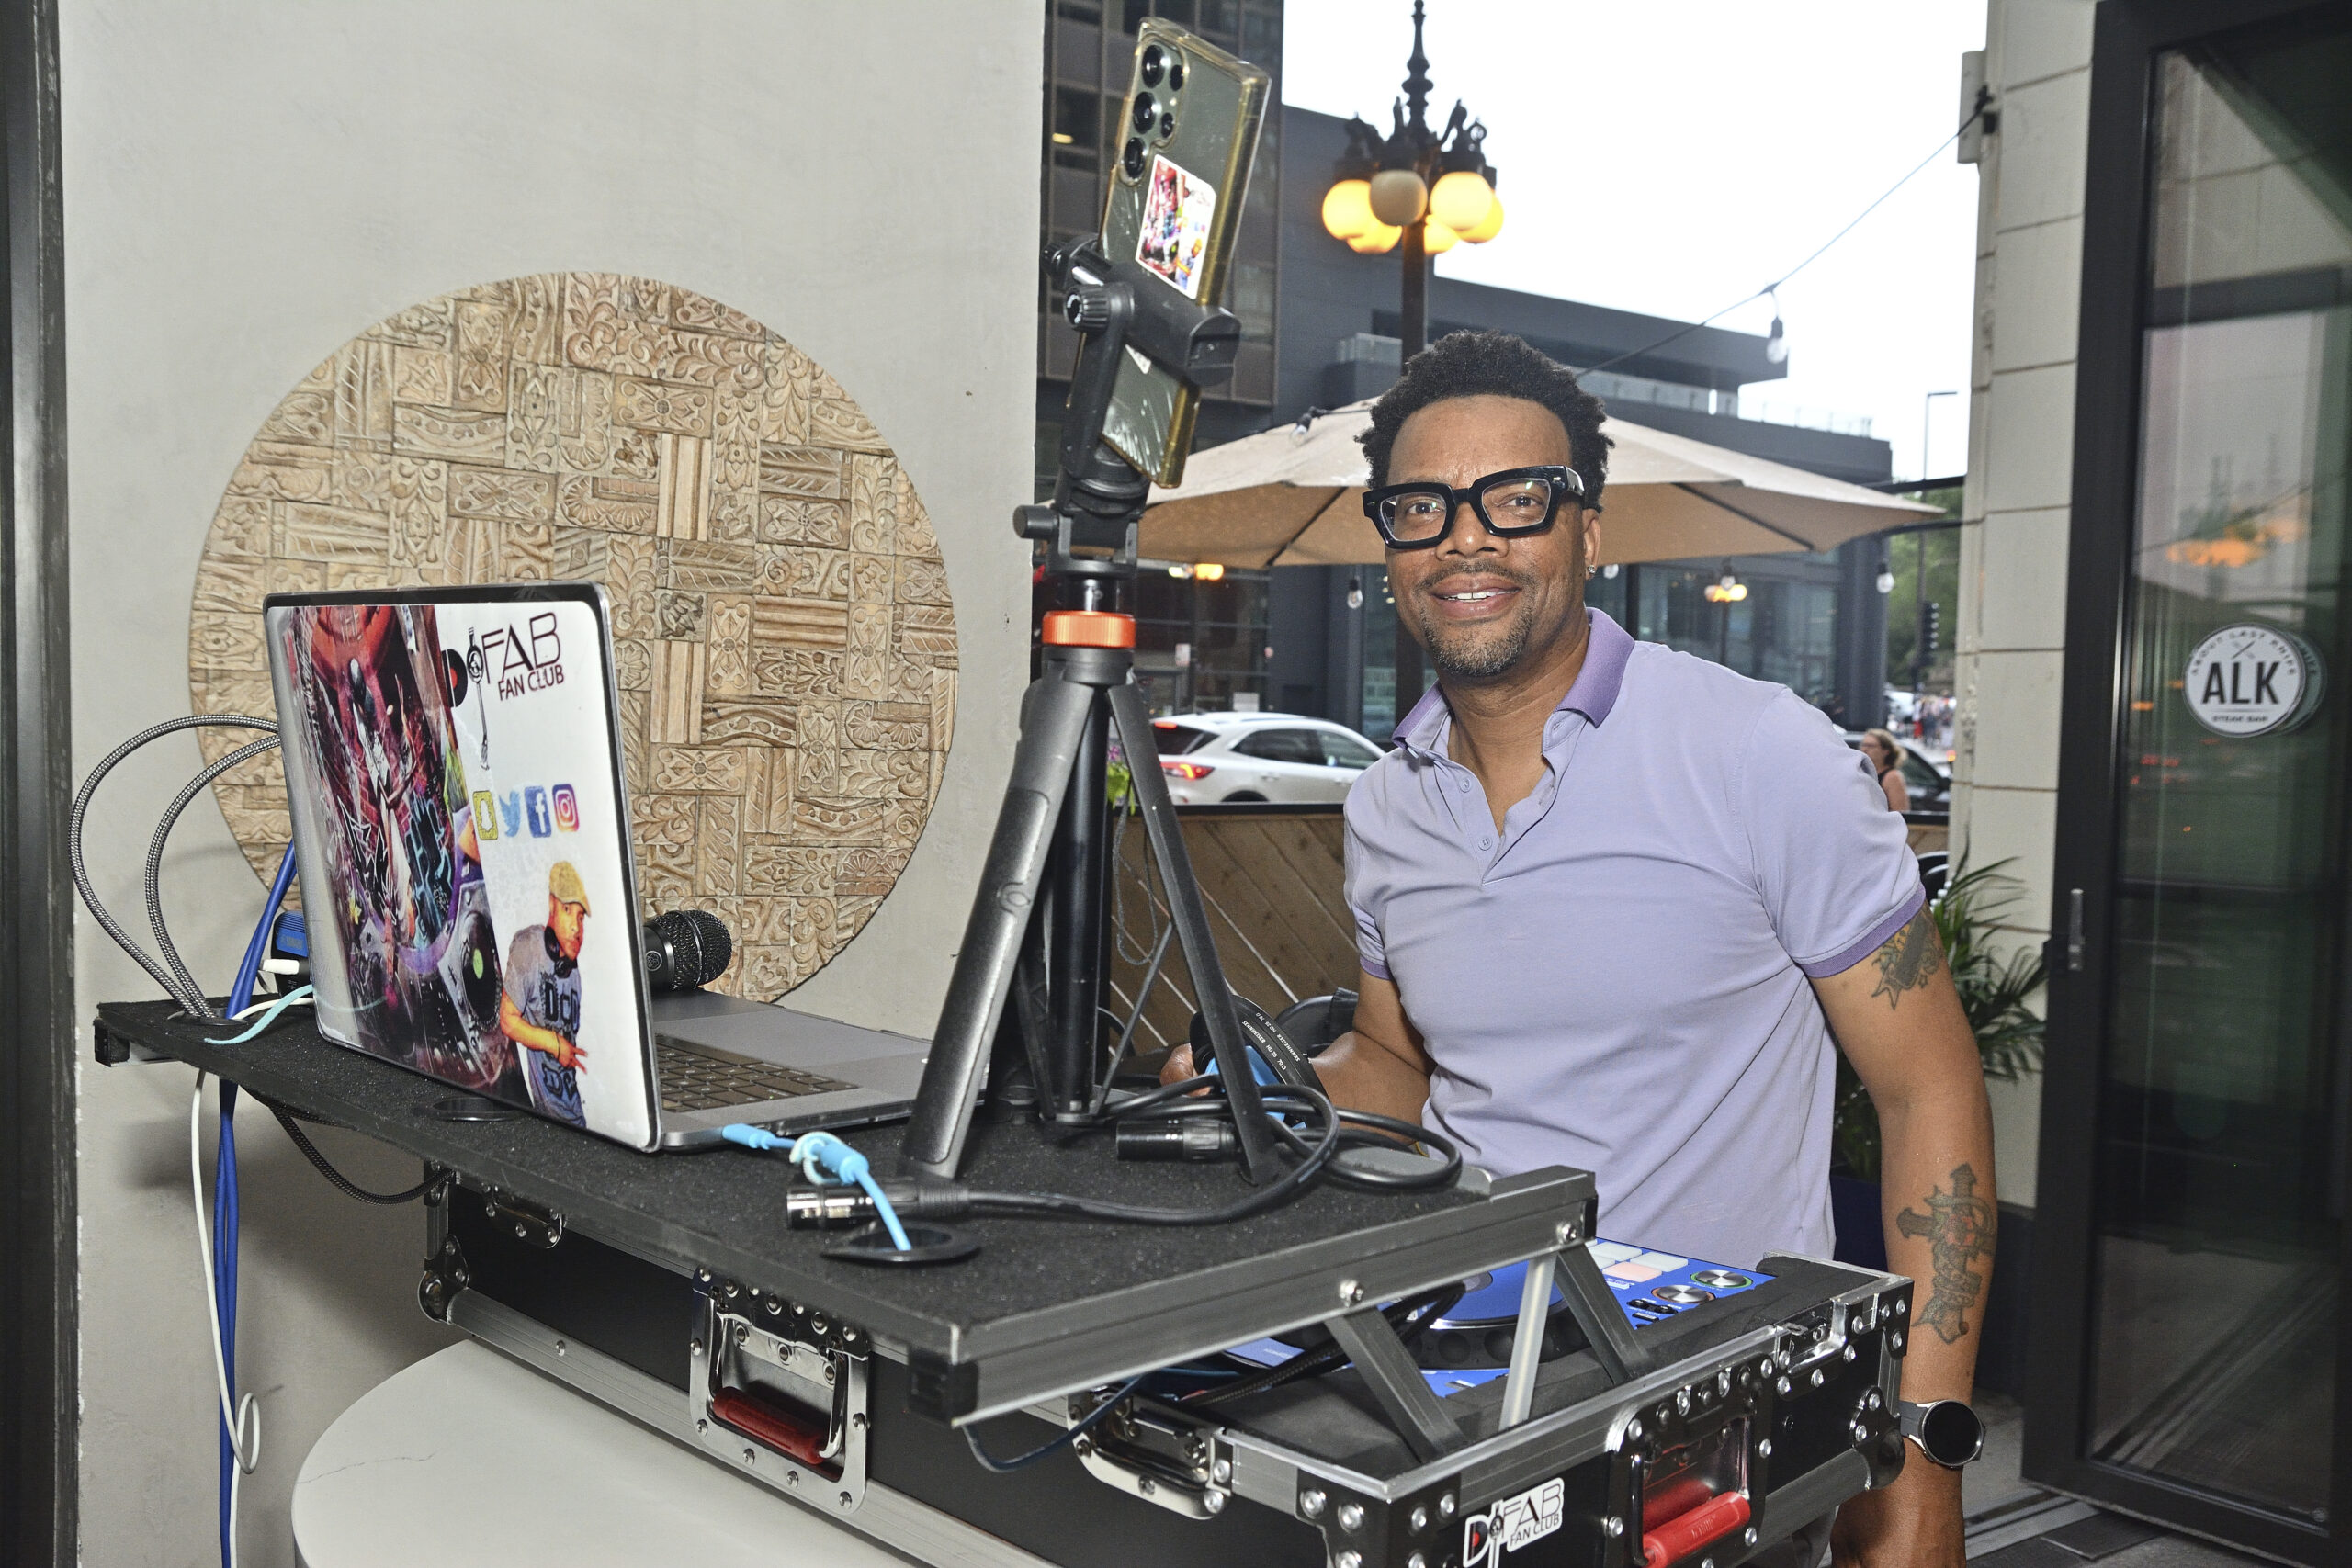 A person wearing glasses and a light purple shirt, standing behind a DJ setup with a laptop, camera on tripod, and other equipment, with an outdoor background.